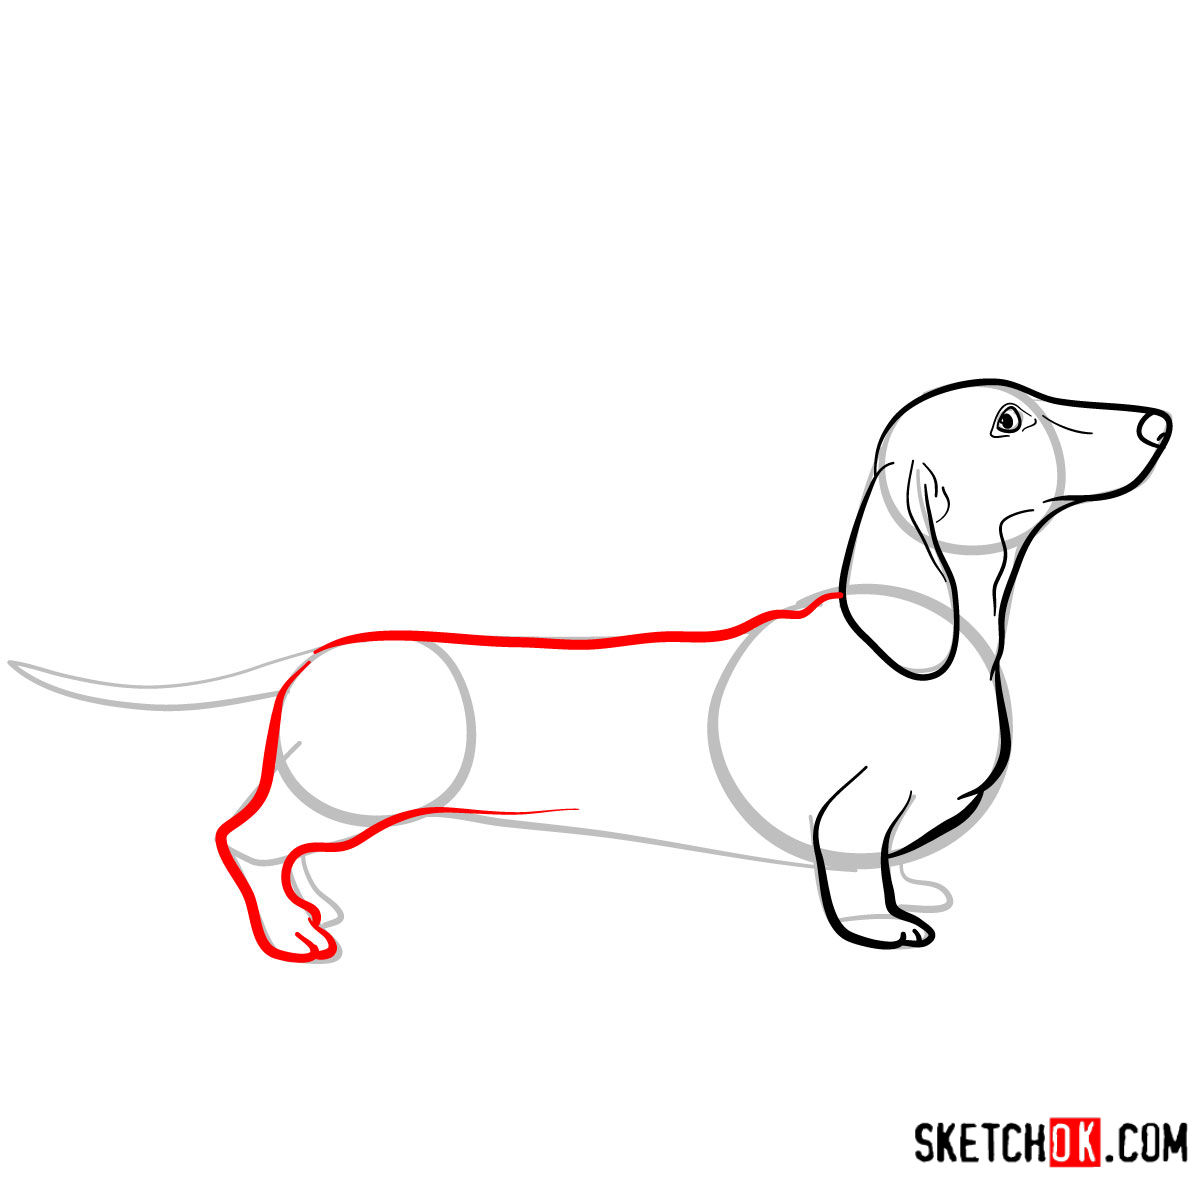 How to draw the Dachshund dog - step 06